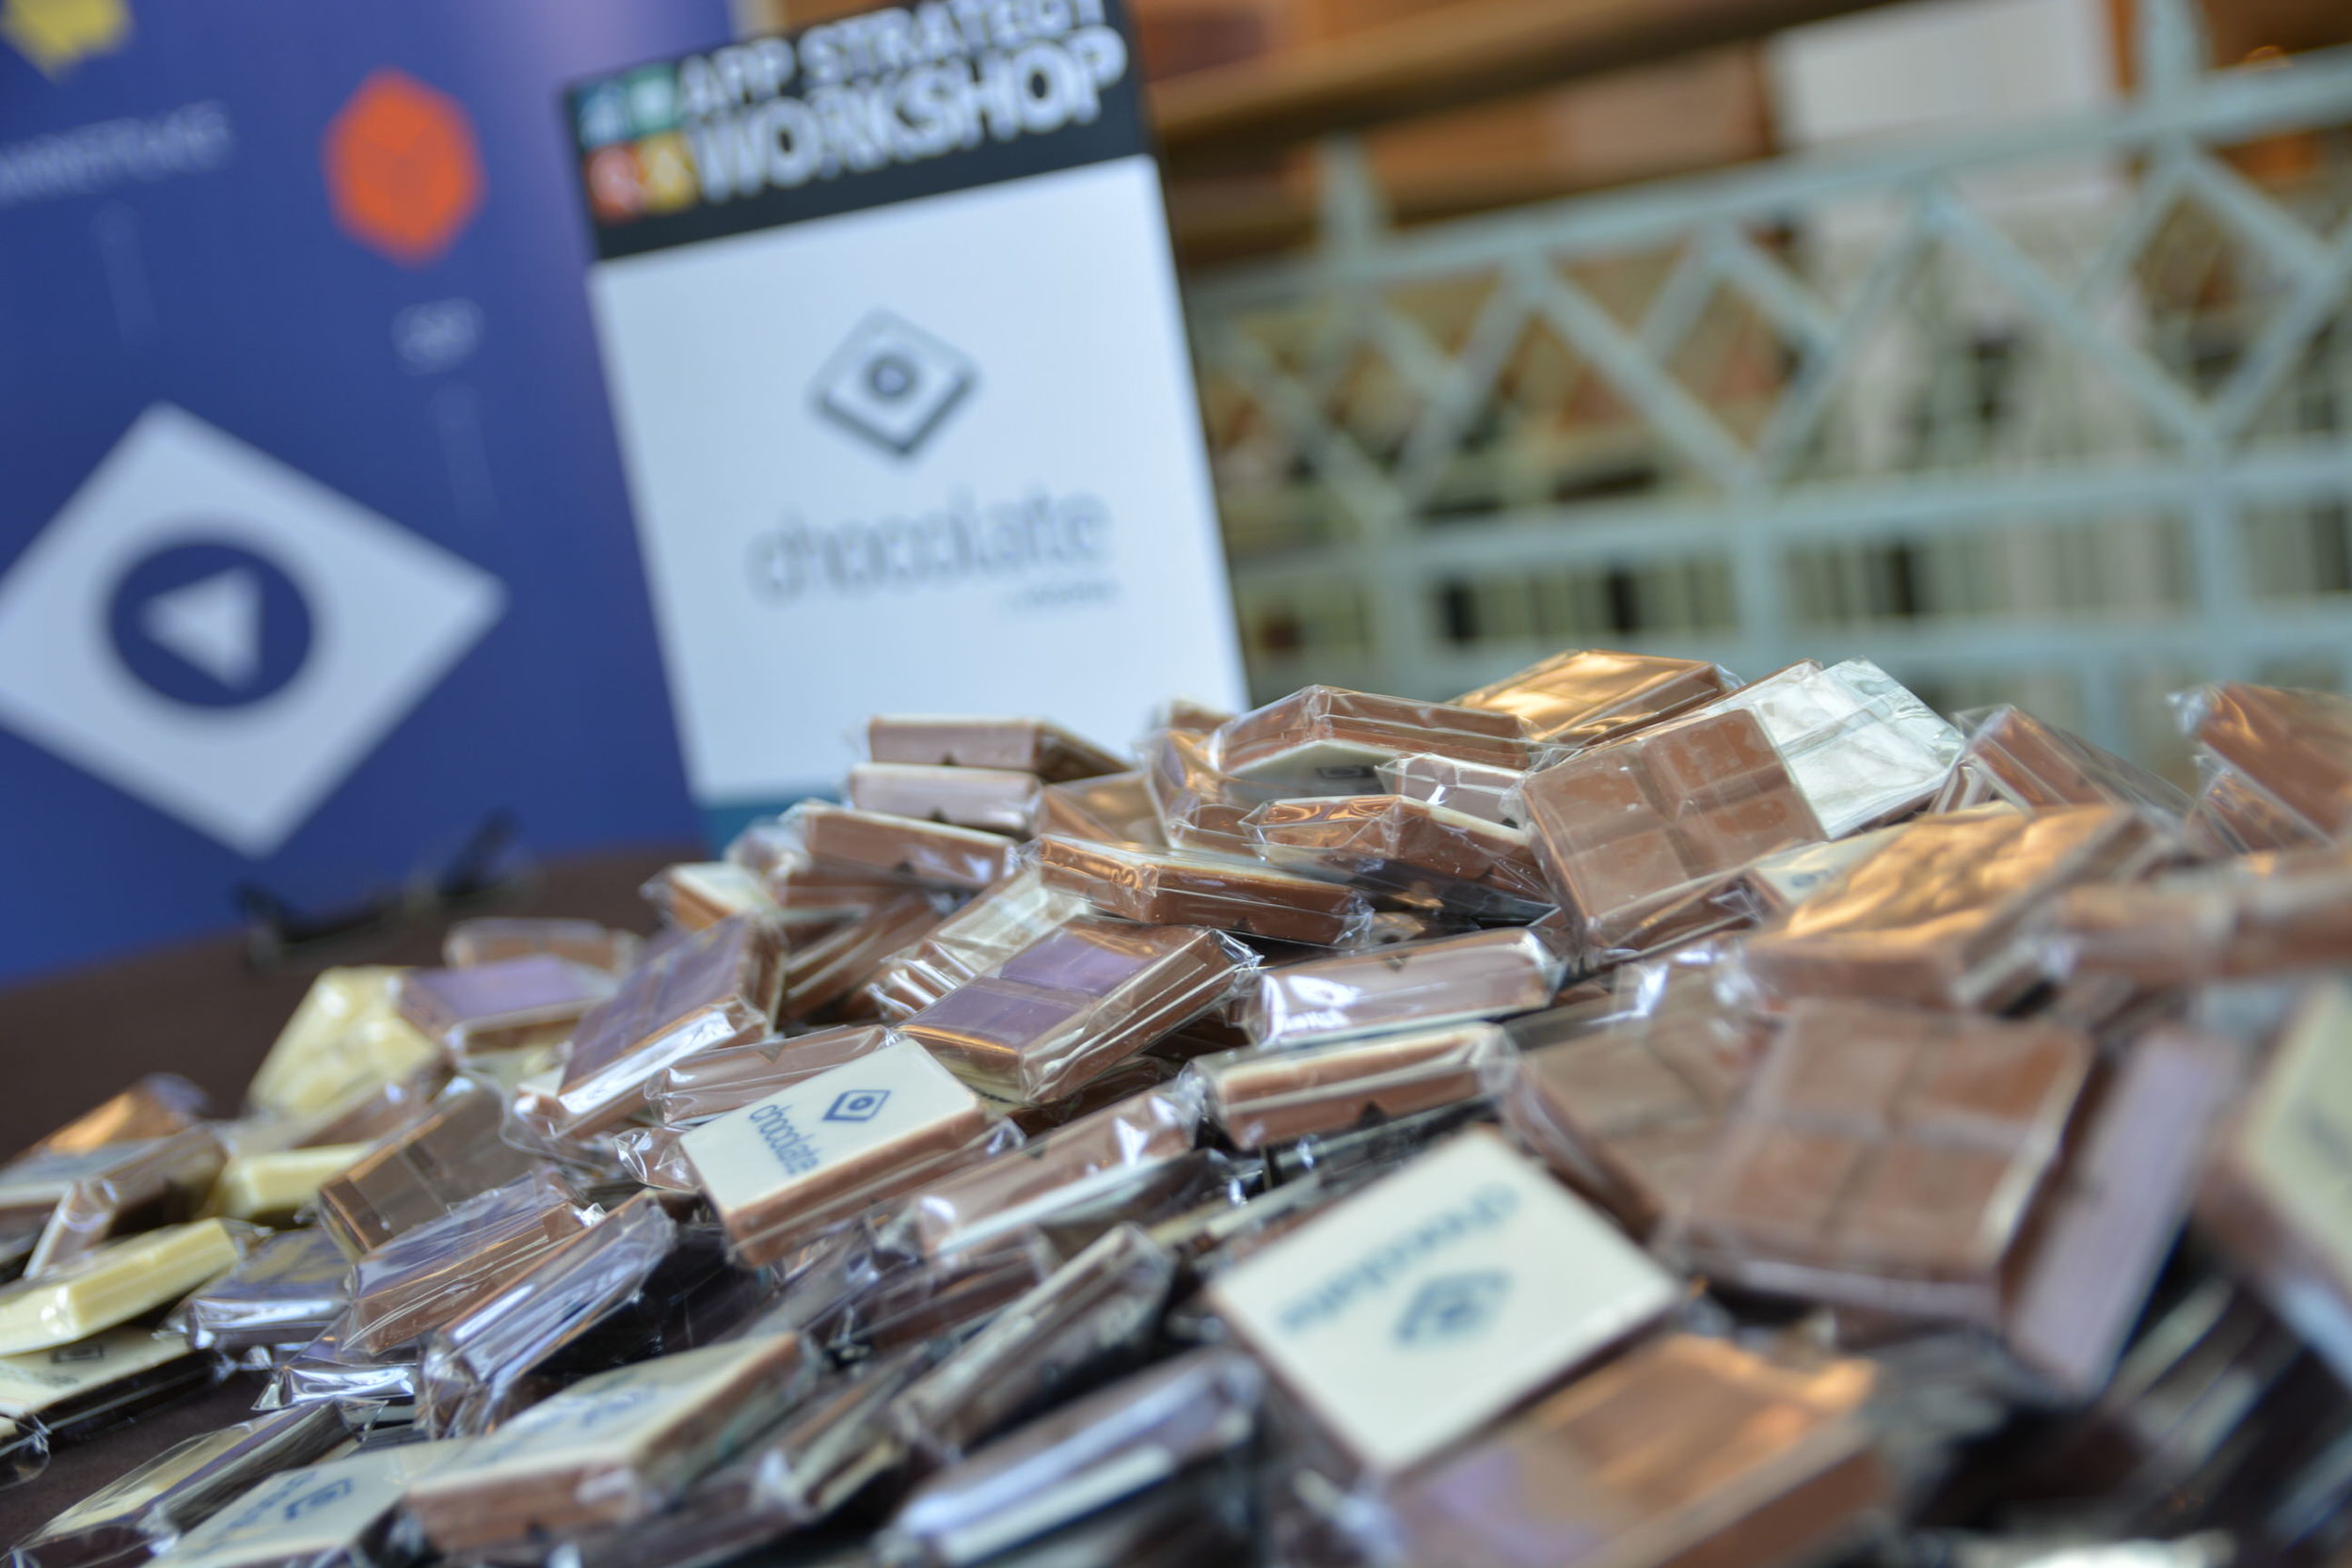 Our sponsor, Chocolate had a great table with treats for attendees!